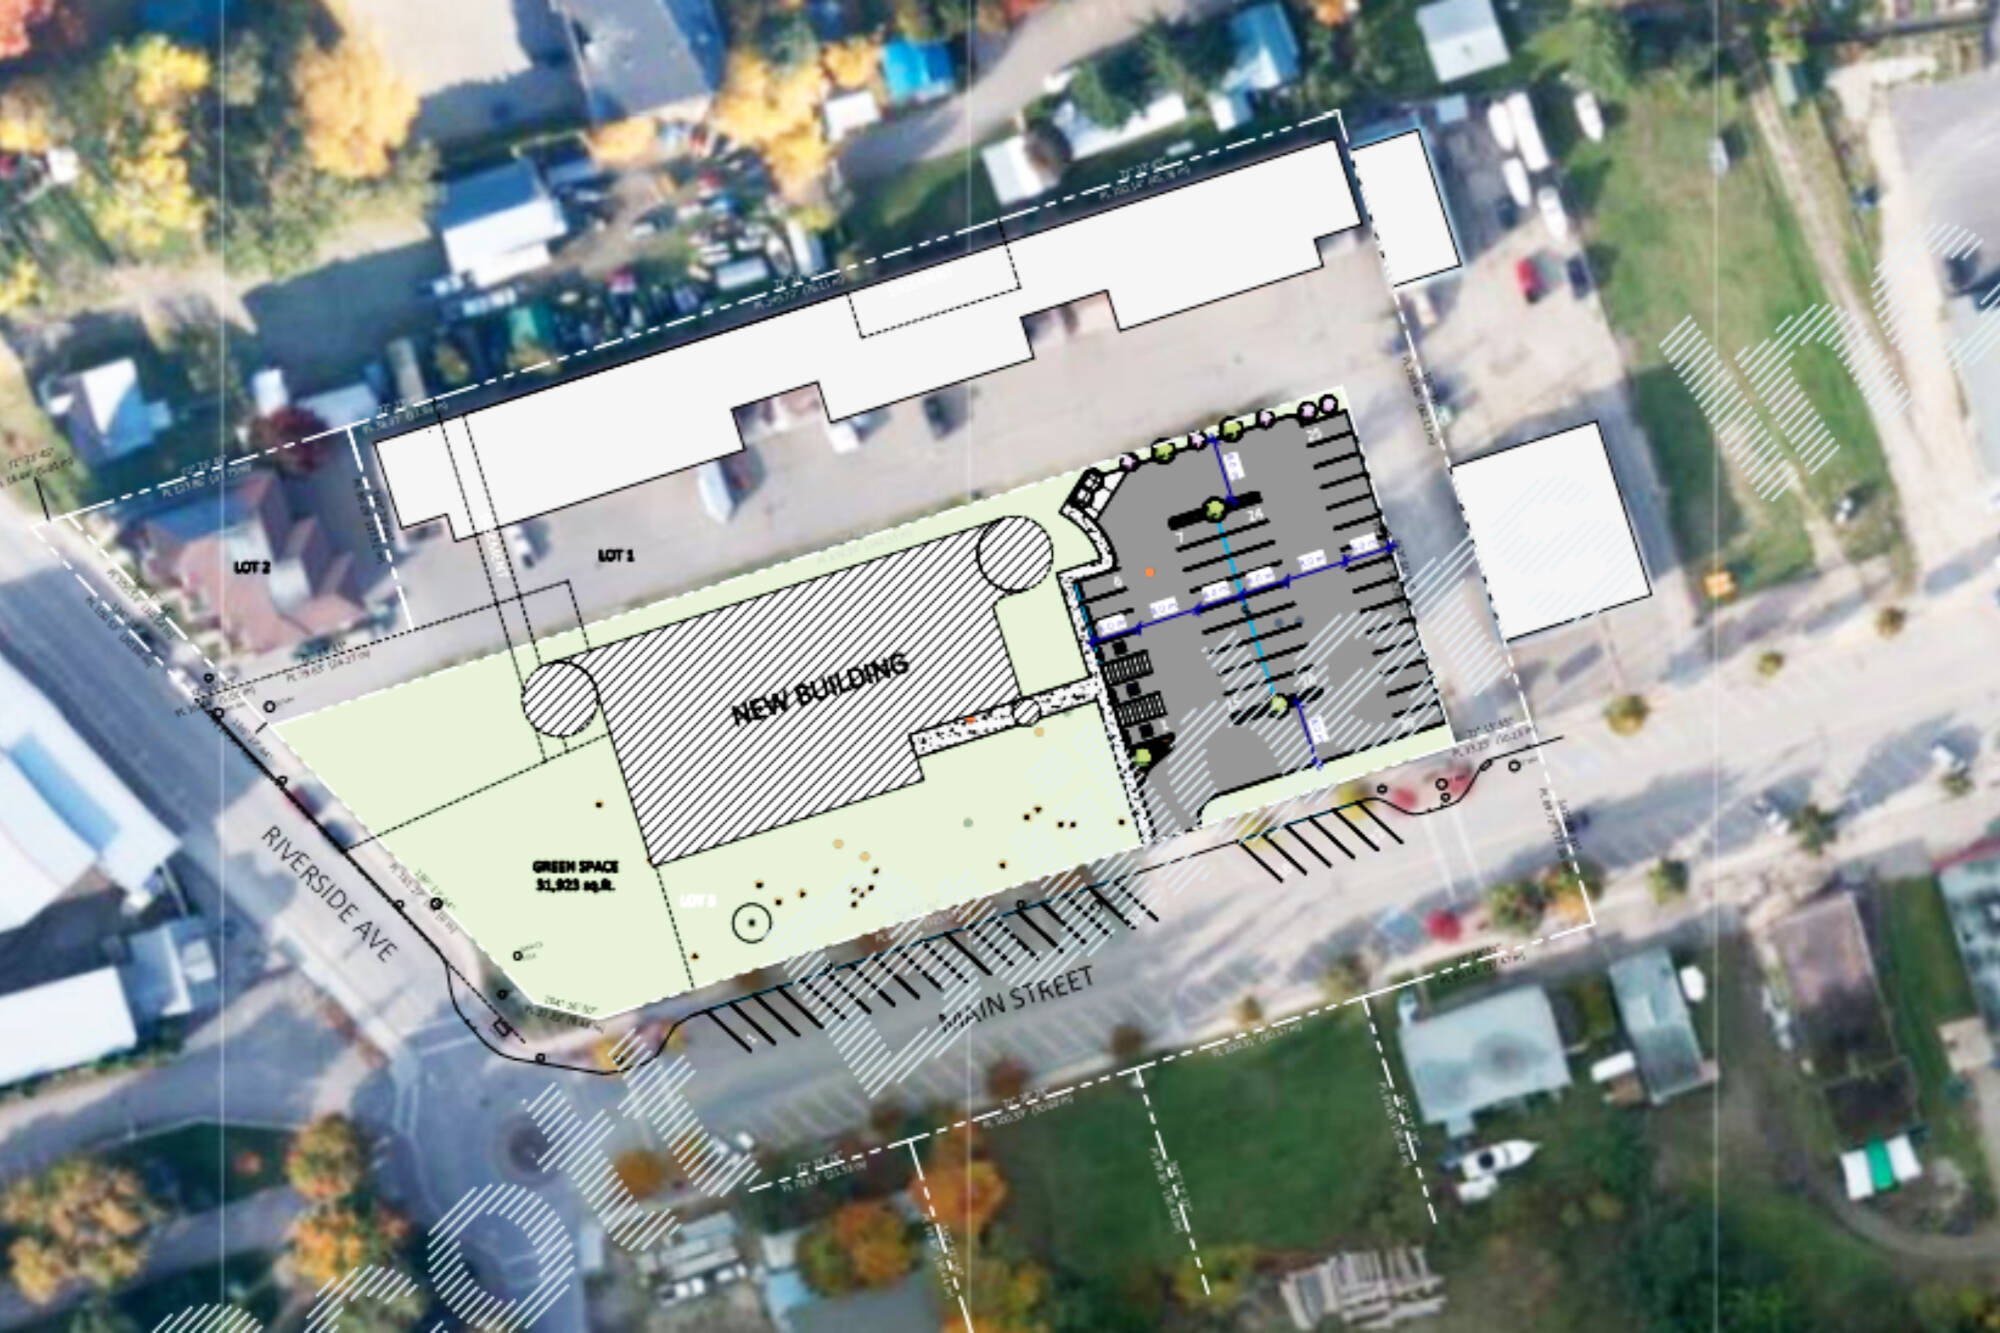 This option for the future Shuswap Healing Centre at 200 Main Street shows about 3,100 square feet or .7 acres of green space and 39 parking stalls. A development permit for the healing centre is expected to be coming to the Sept. 28 Sicamous council meeting. (District of Sicamous image)